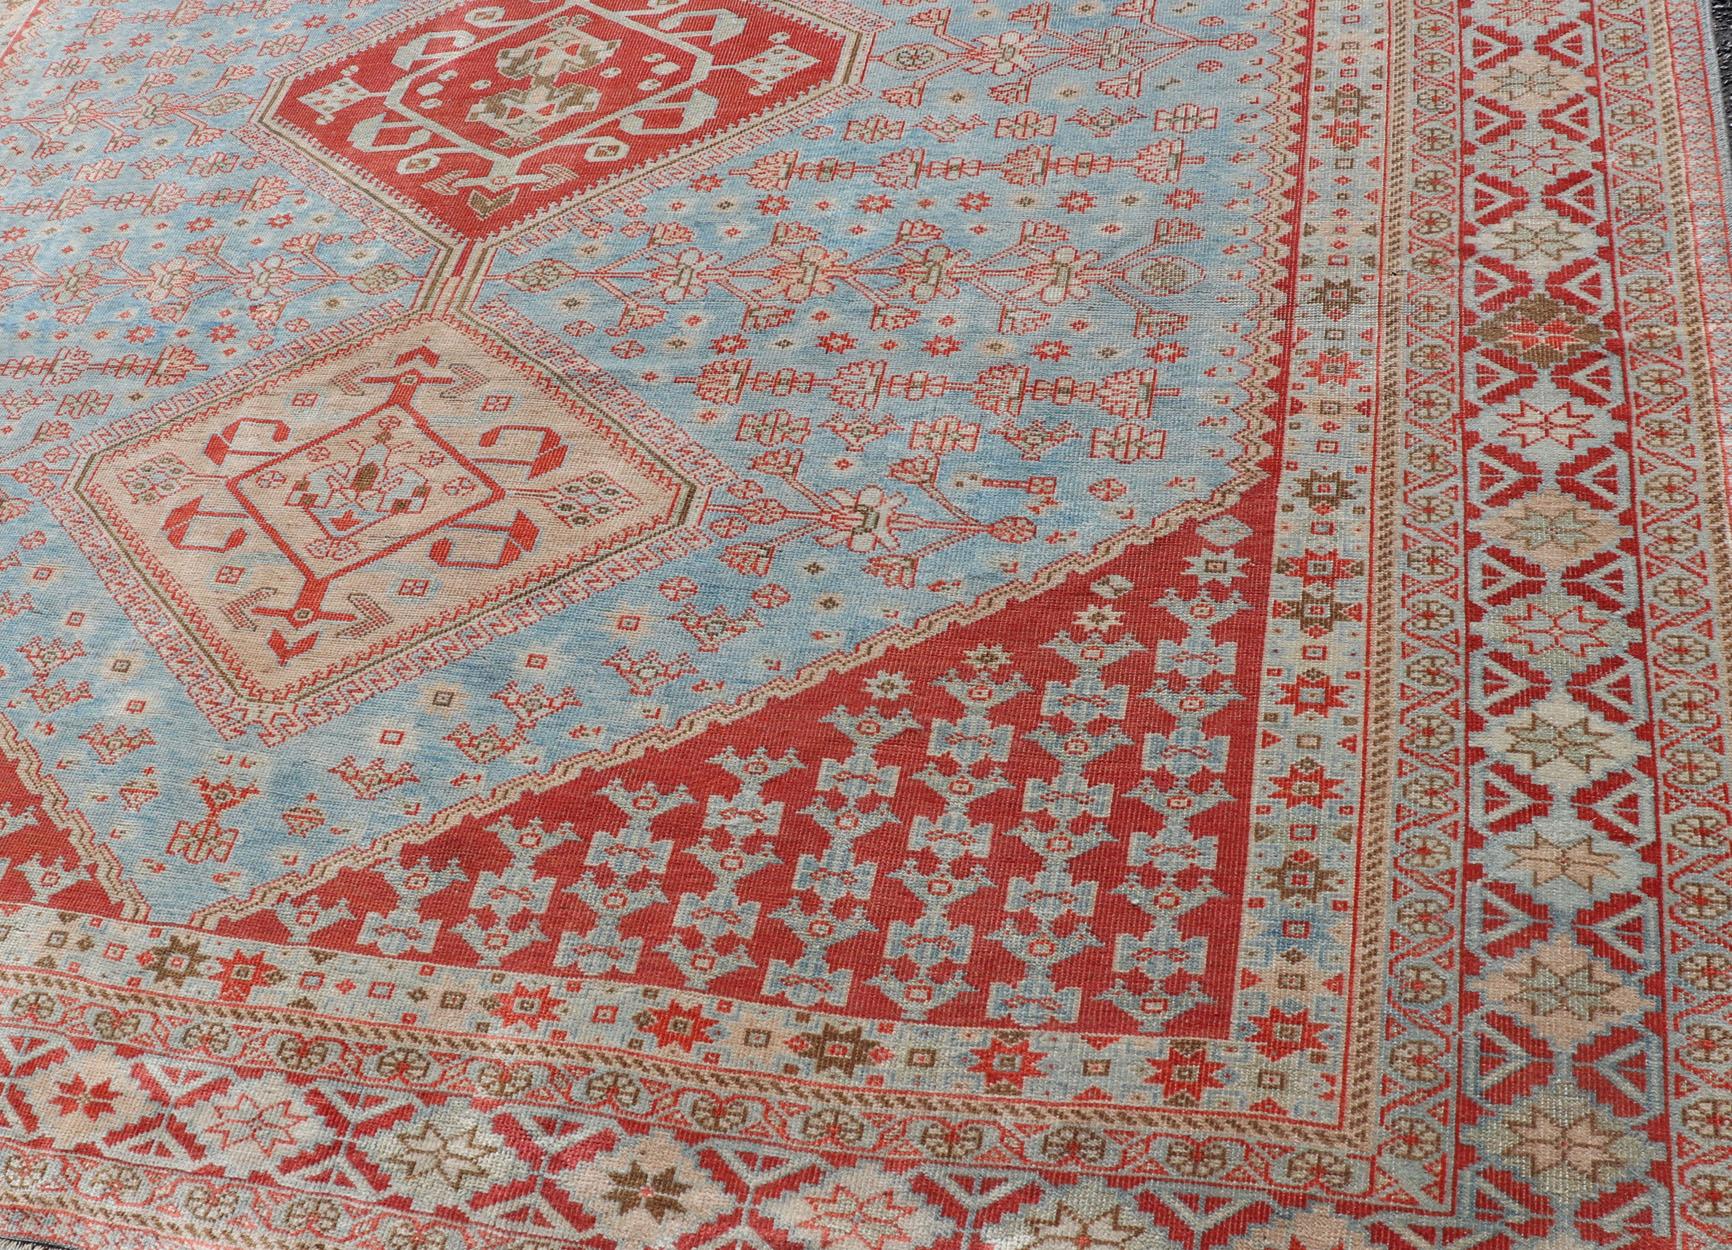 20th Century Antique Persian Qashqai Shiraz Tribal Rug with Latch Hooked Diamond Design For Sale